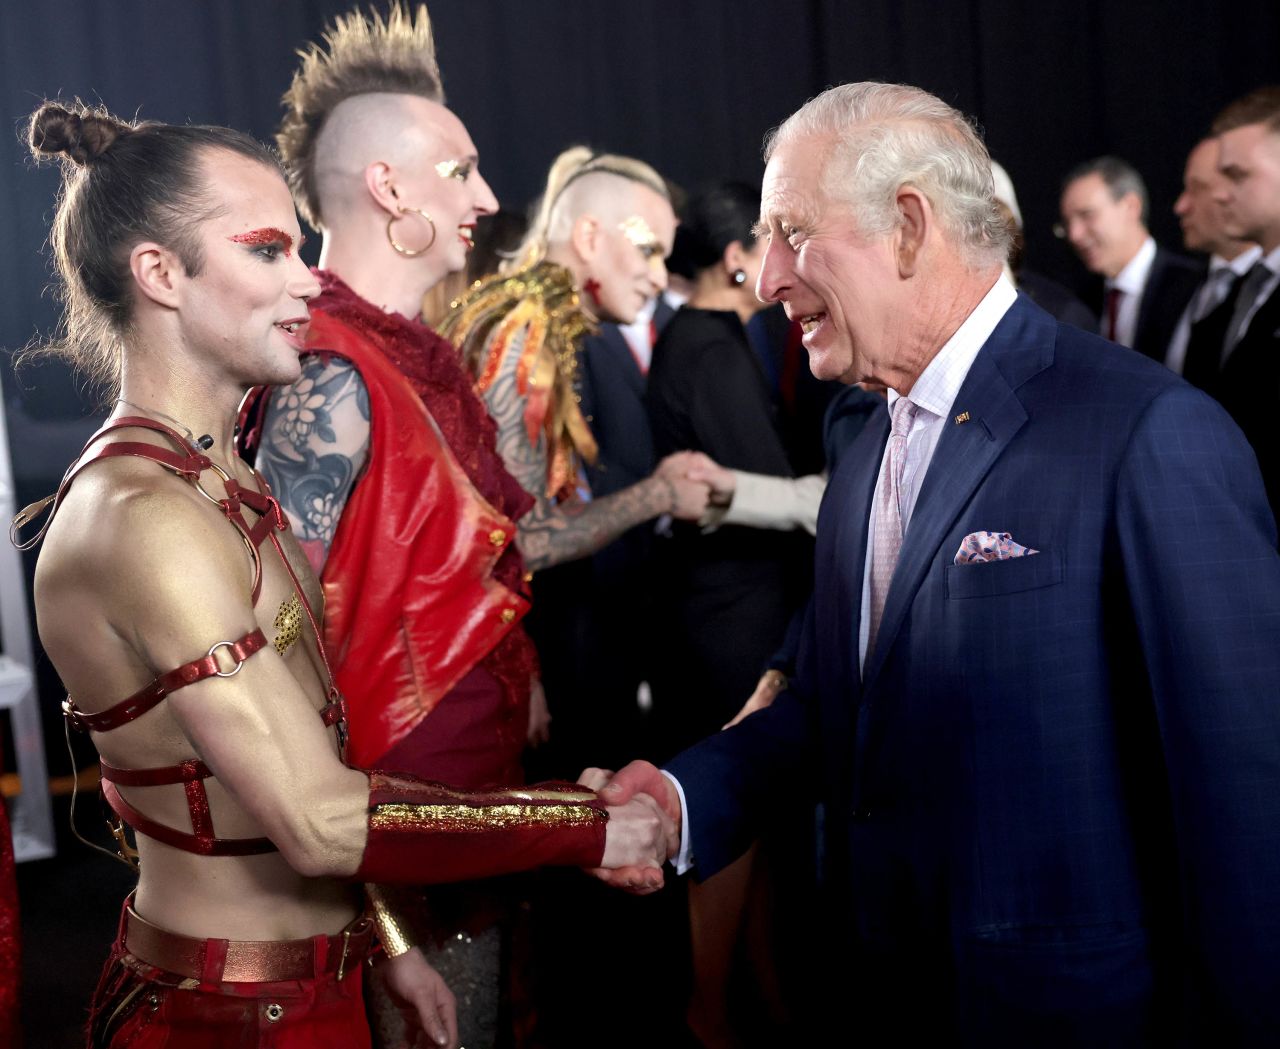 The King greets the band Lords of The Lost during a reception in Hamburg, Germany, in March 2023. The King spent three days in Germany for what was <a href="https://www.cnn.com/2023/03/29/europe/gallery/king-charles-visits-germany/index.html" target="_blank">his first overseas state visit as monarch</a>.